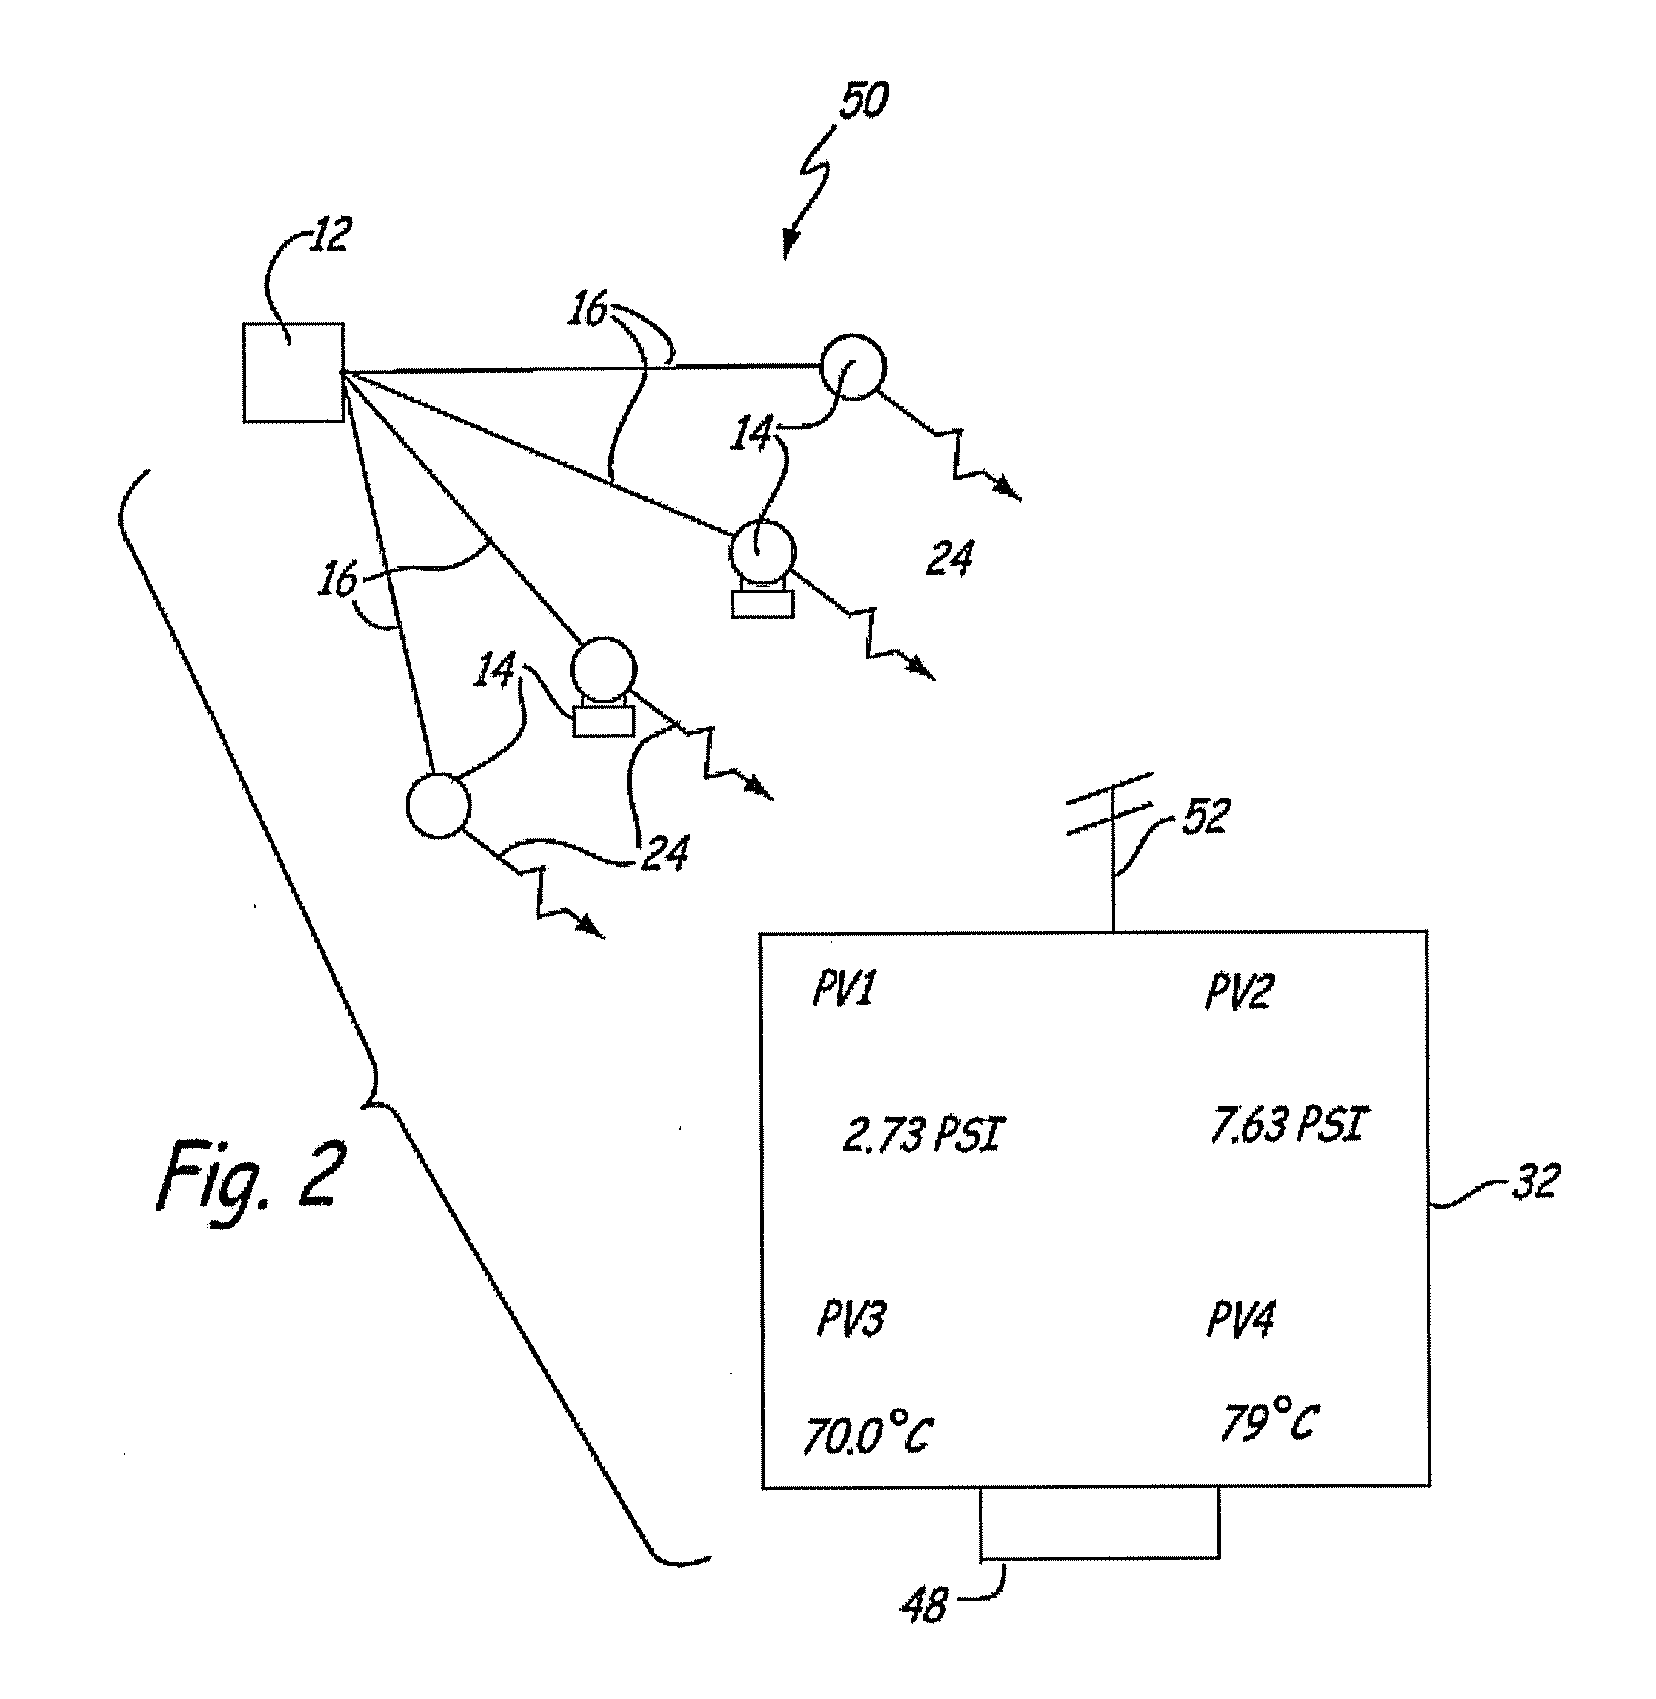 RF adapter for field device with low voltage intrinsic safety clamping